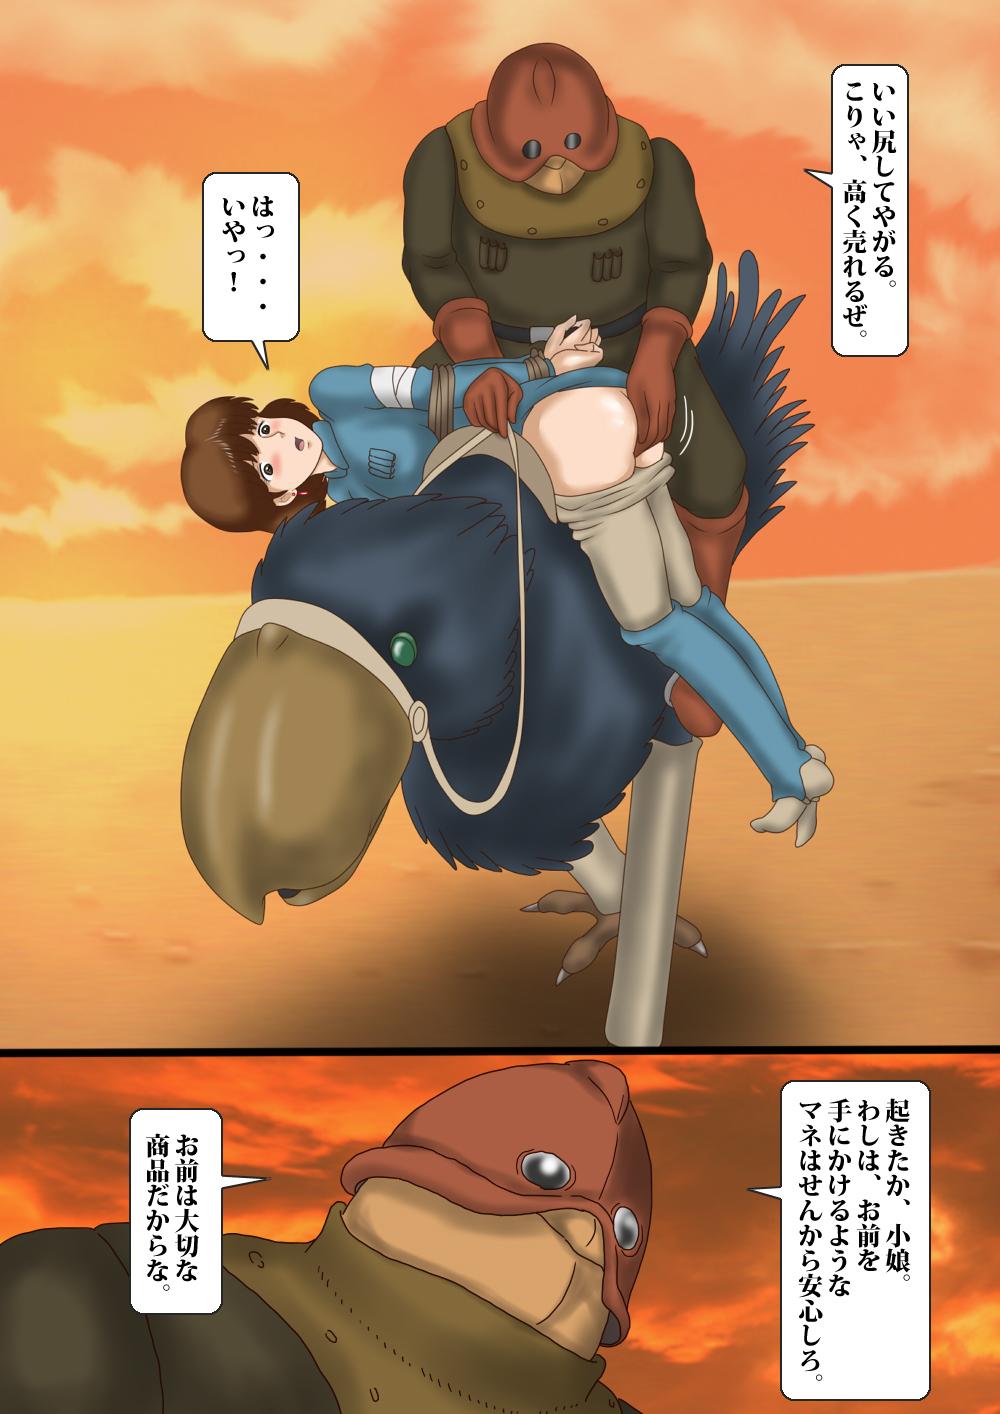 Nudes Kaze no Tani no Goumon Aido - Nausicaa of the valley of the wind Clothed - Page 3